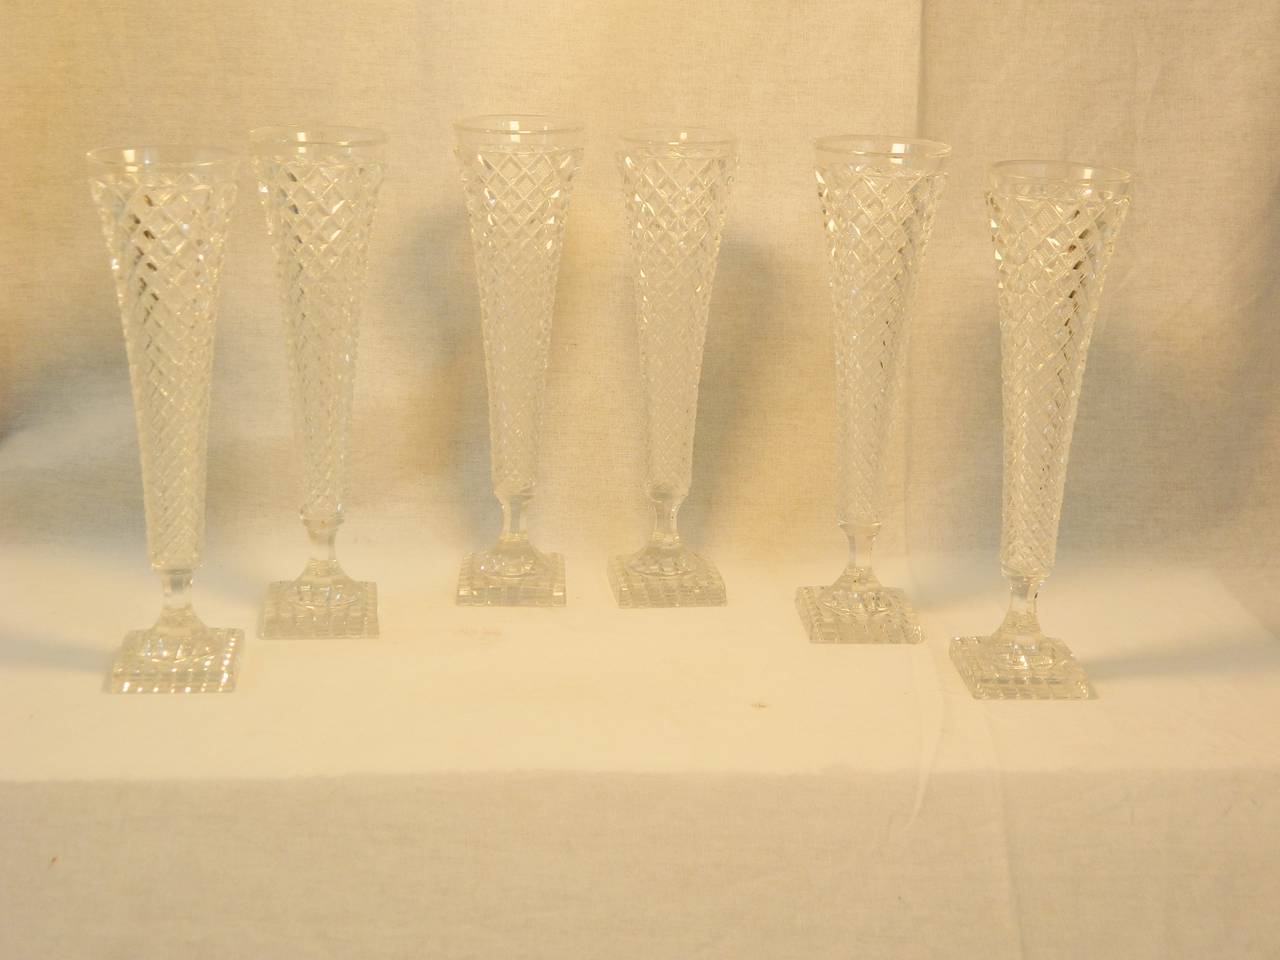 Set of Twelve Hand Made Baccarat Cut Glass Champagne Flutes, France, Circa 1890.  Excellent condition